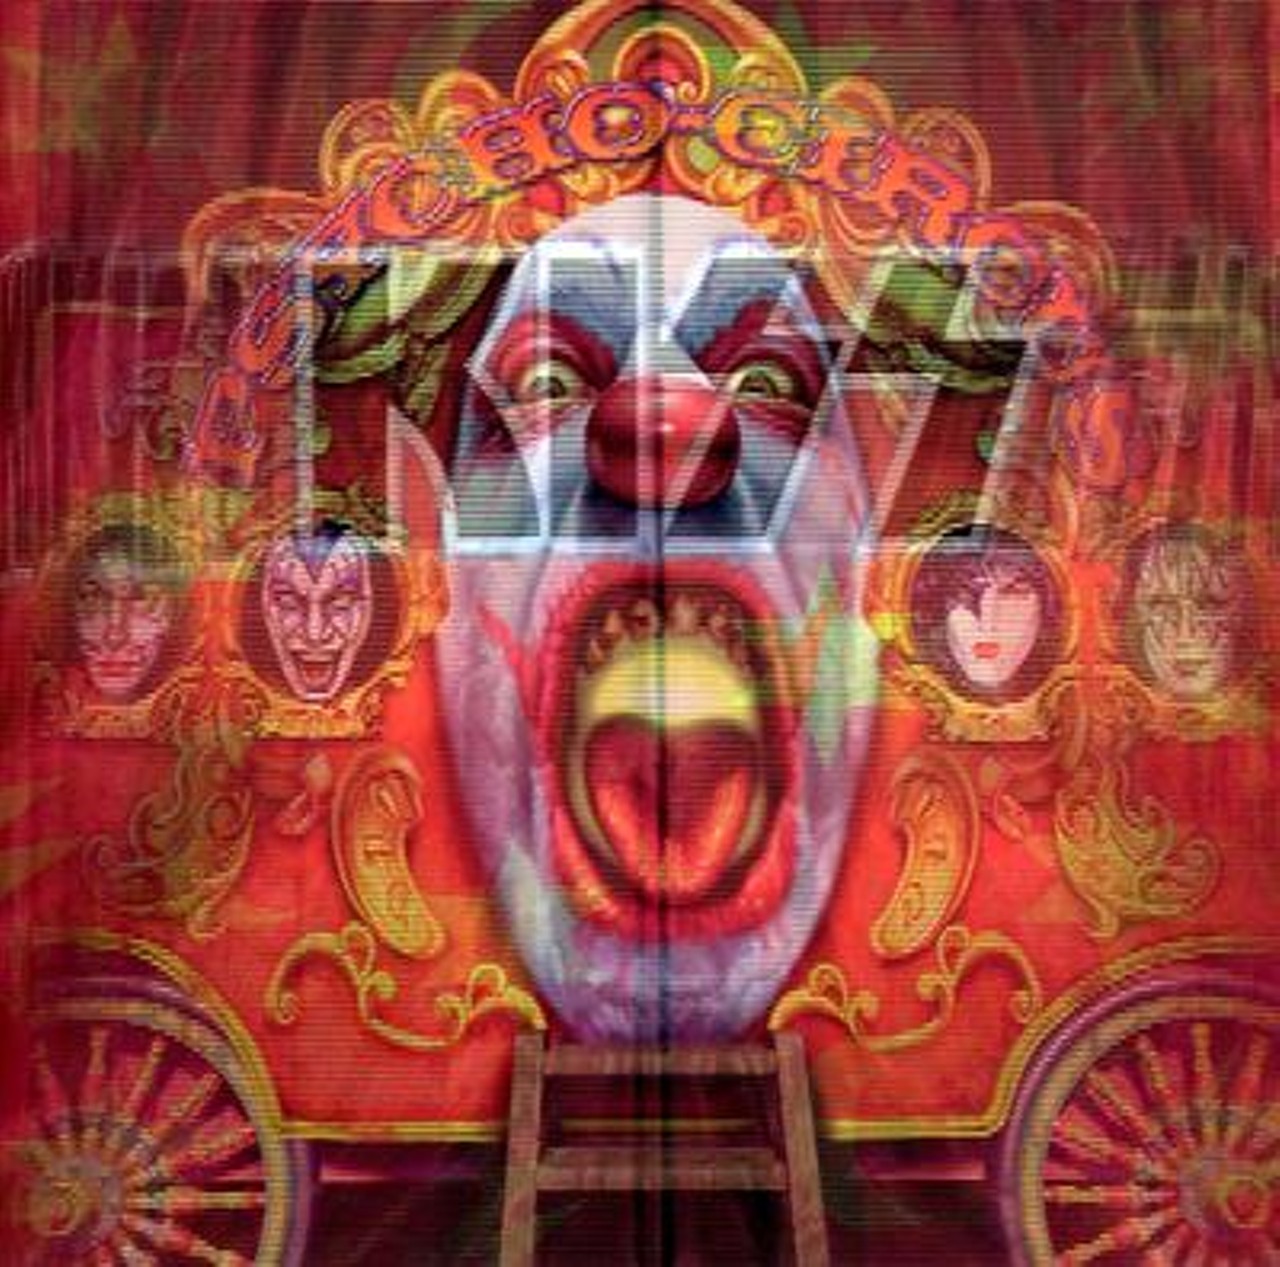 This was the much-awaited reunion album with Ace and Peter, but it is very skippable. Fun fact: “Into The Void” and “You Wanted The Best” are the only songs that have Ace, Paul, Gene and Peter all performing on the same track. Those songs are the record’s highlights. On the whole, Psycho Circus lacks focus and smells like a quick attempt for some fast cash.